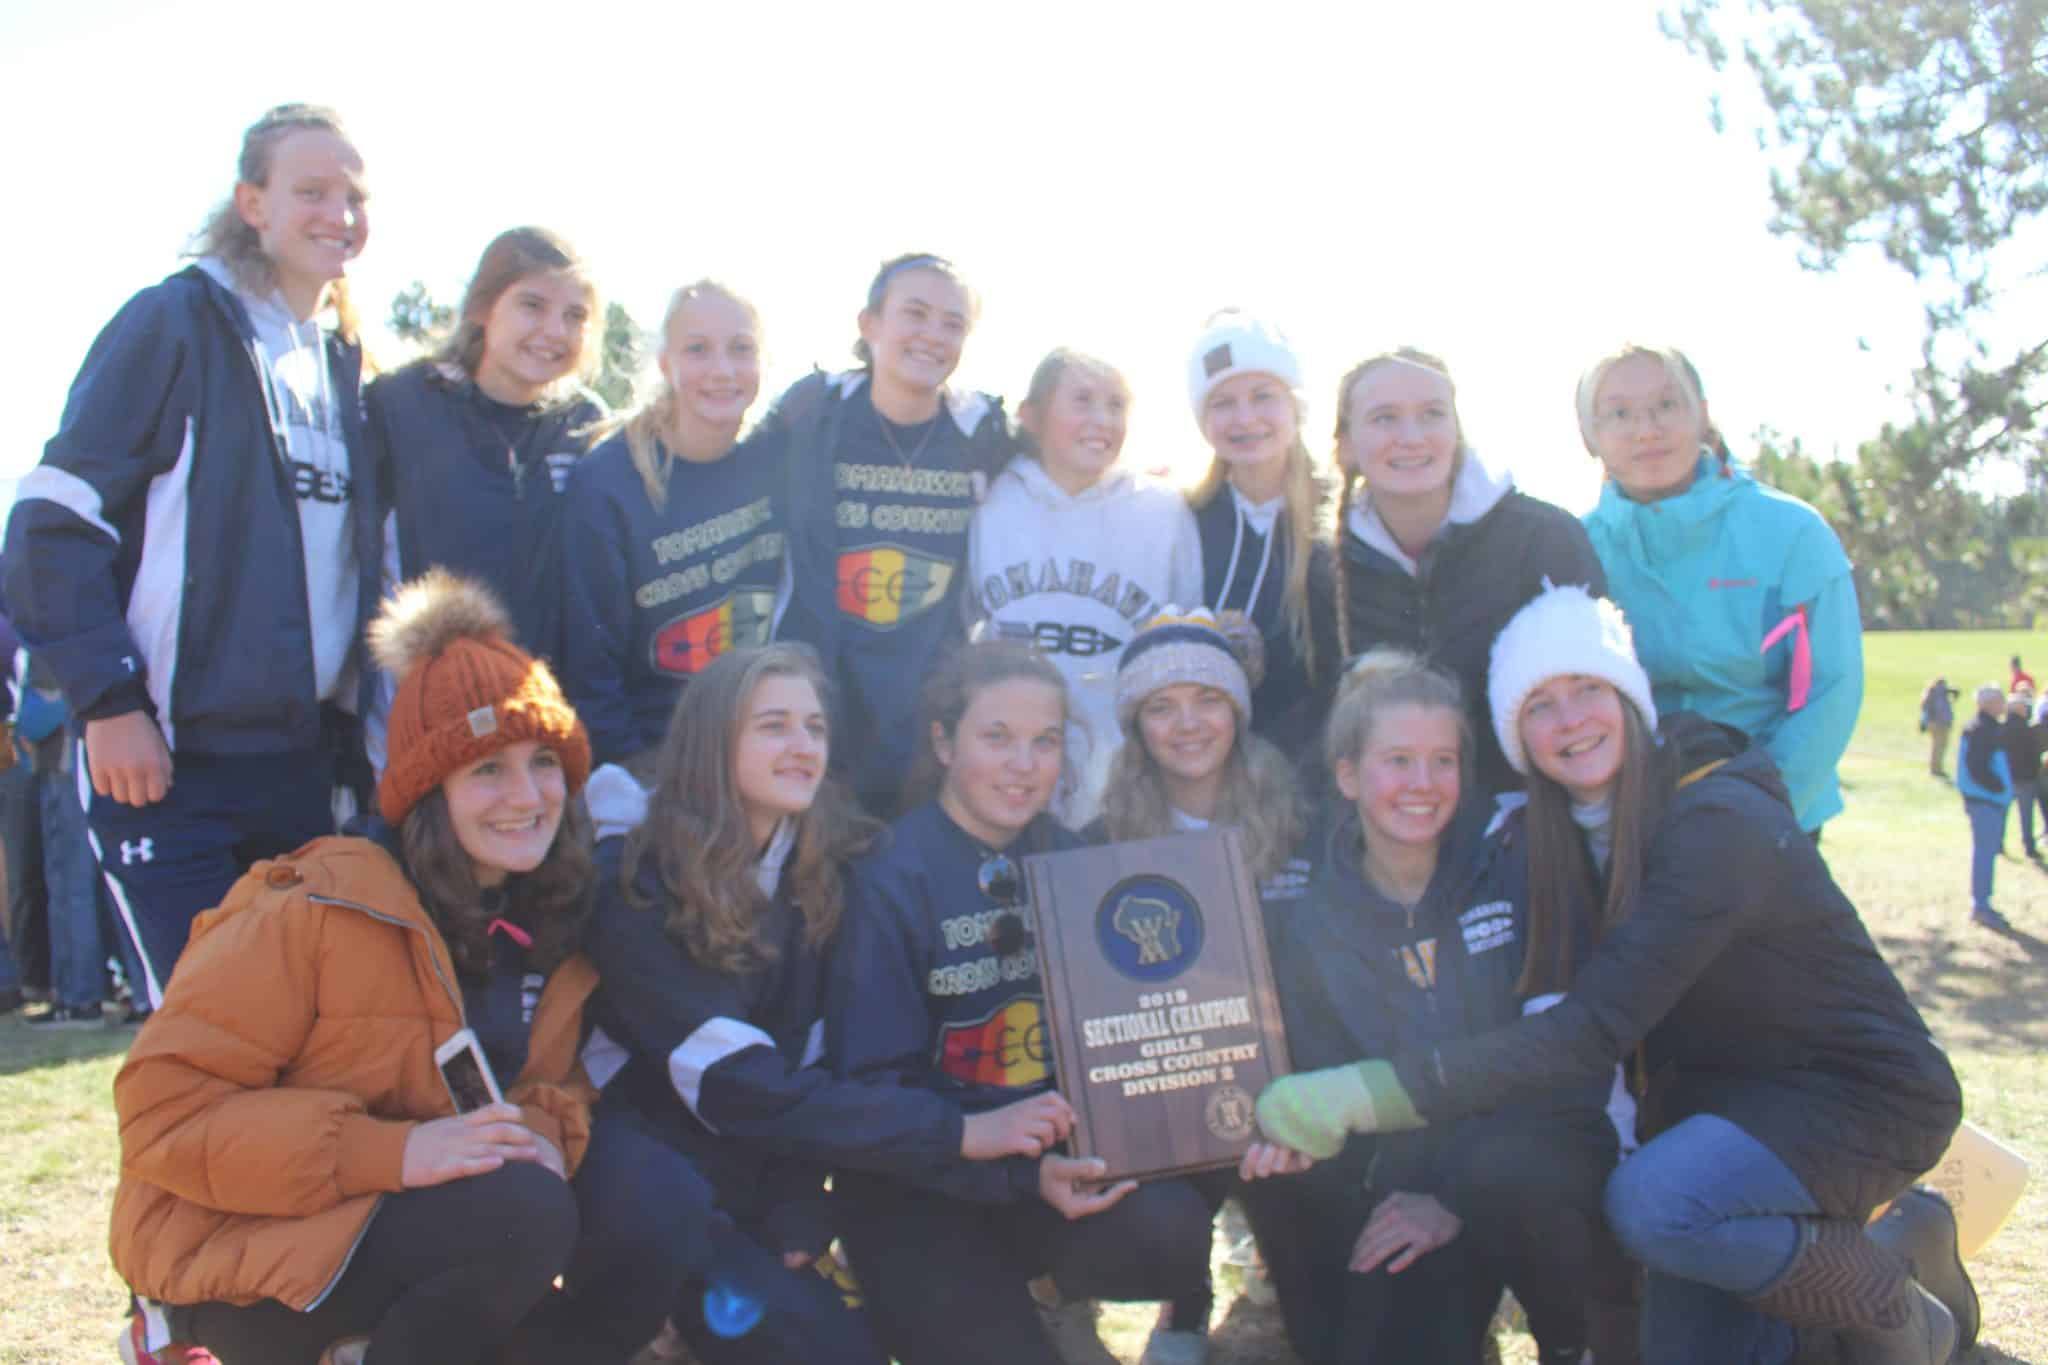 After decade-long hiatus, Lady Hatchet X-Country wins Sectional to advance State Championship: Noah Buckwalter to represent Hatchet boys’ team at Wisconsin Rapids Saturday, Nov.2